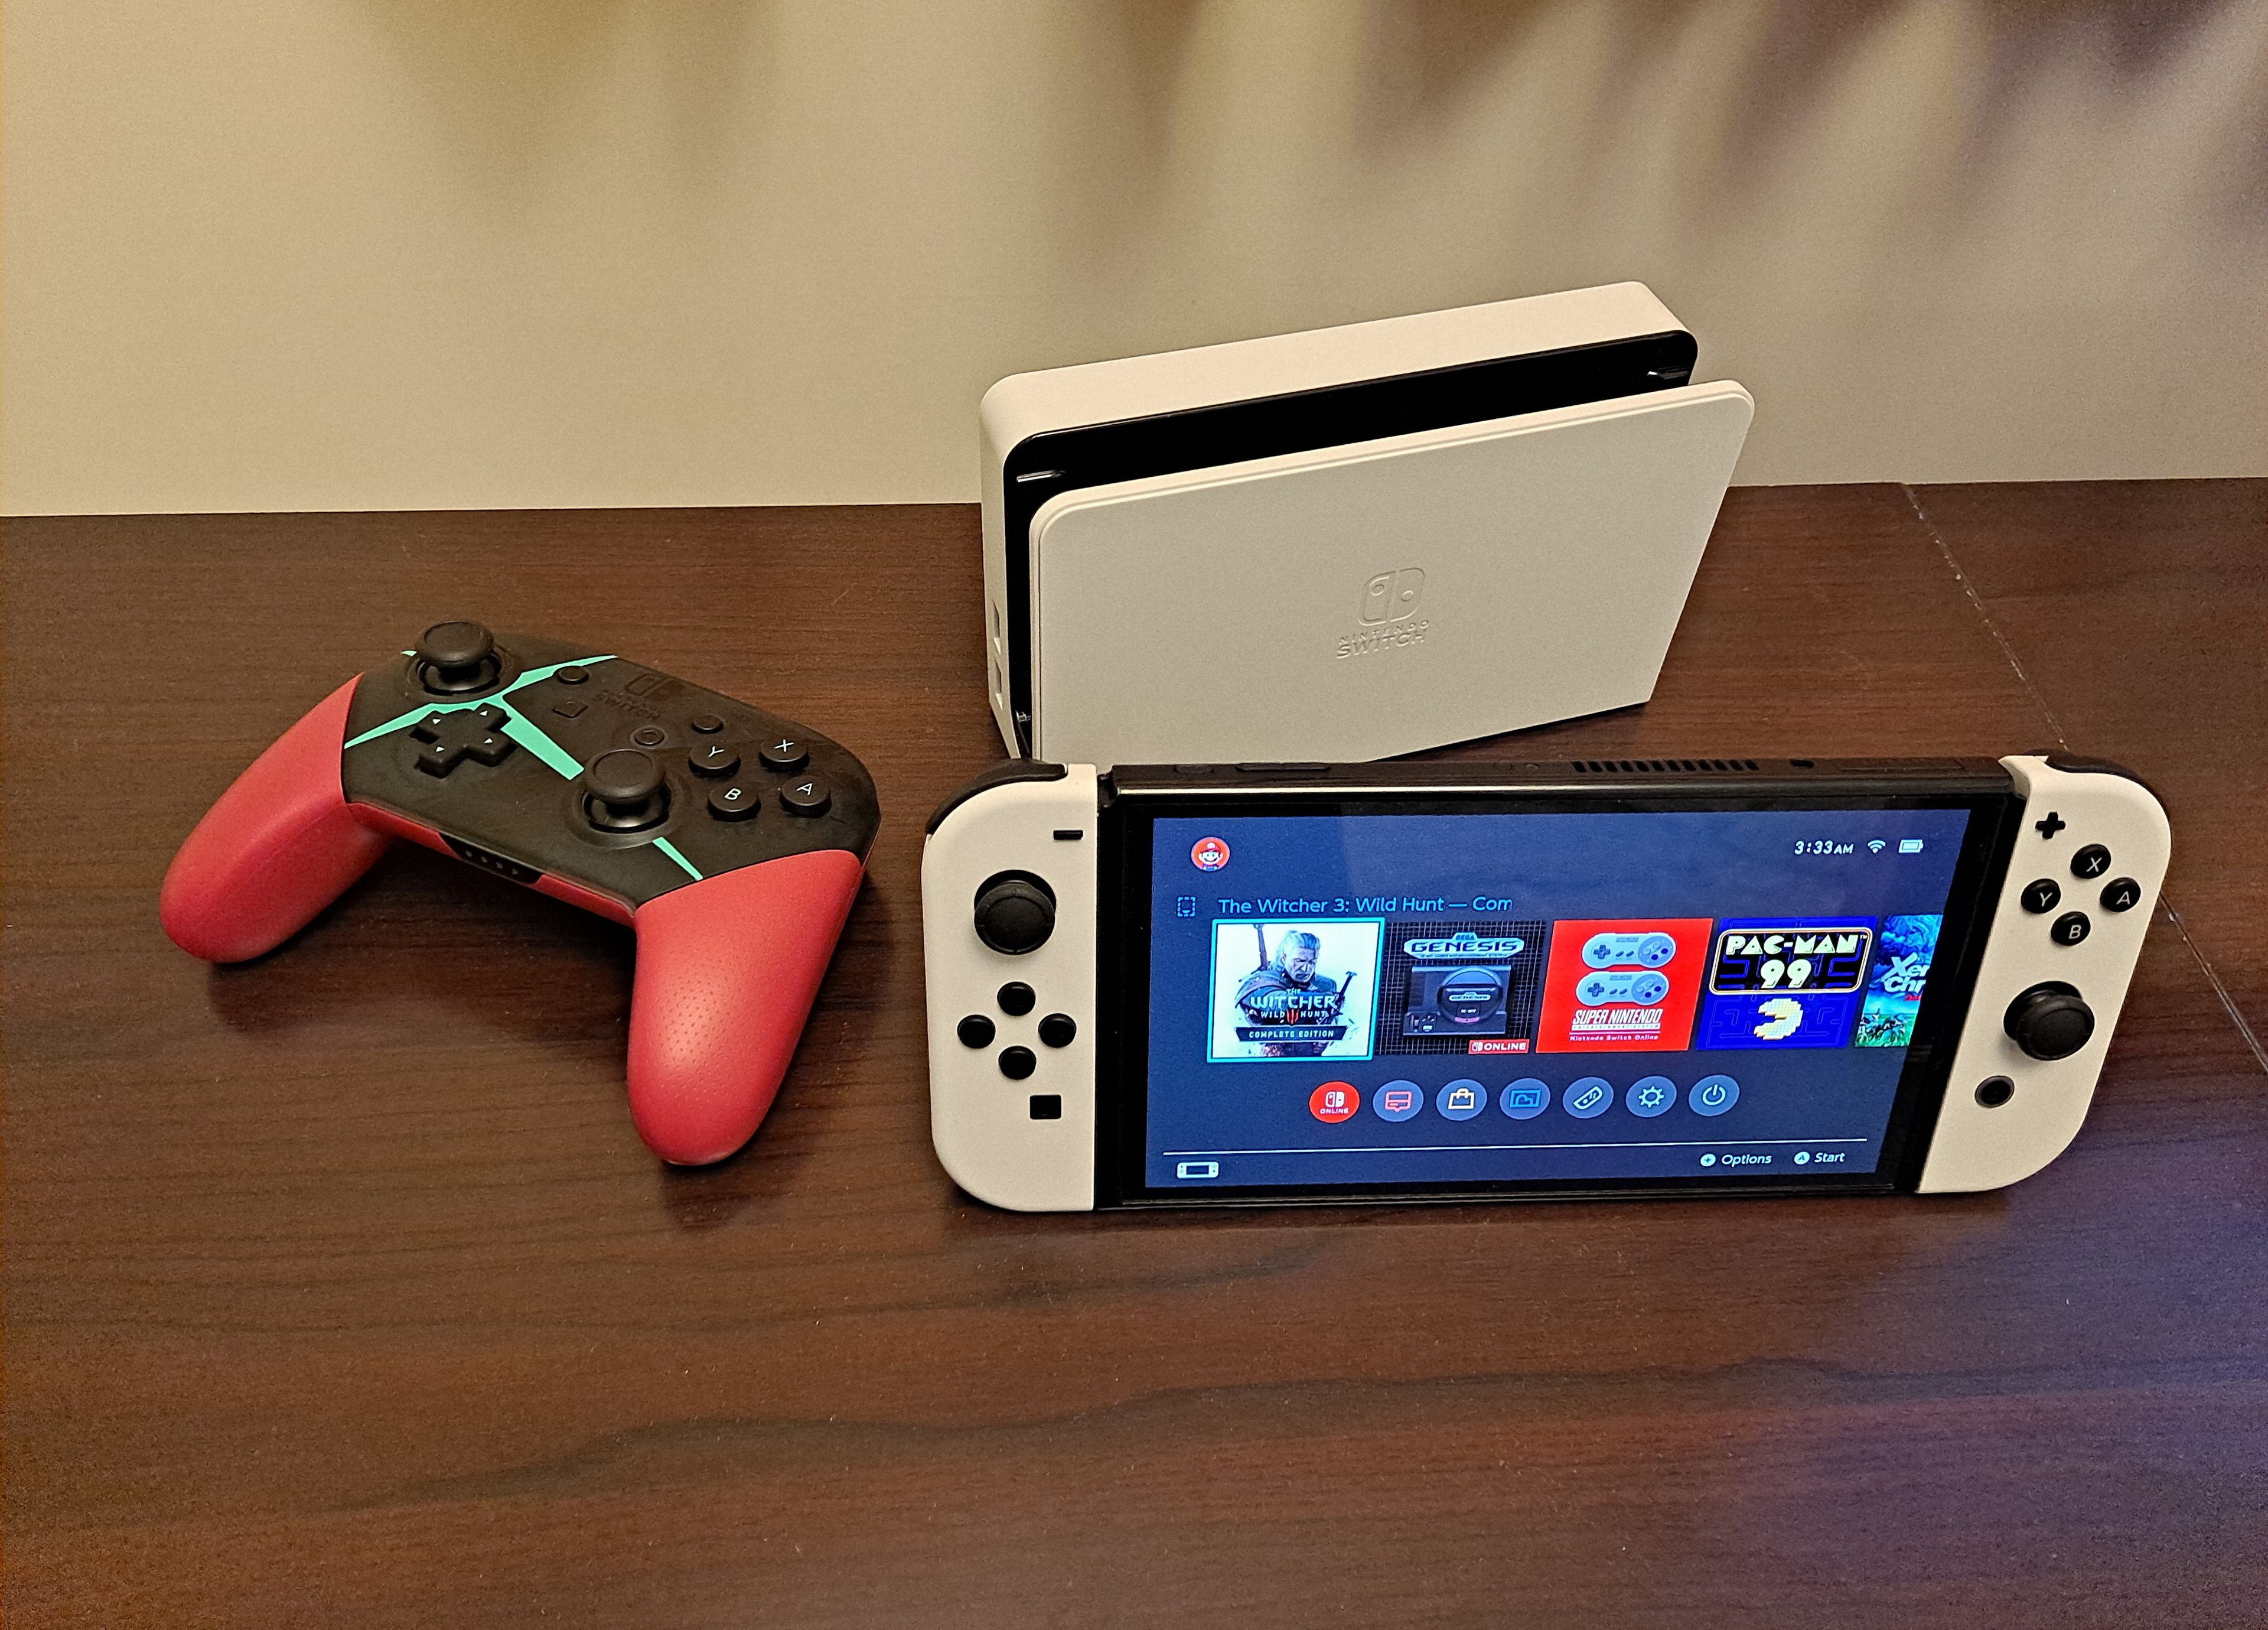 Best Displays for Nintendo Switch OLED in Docked Mode